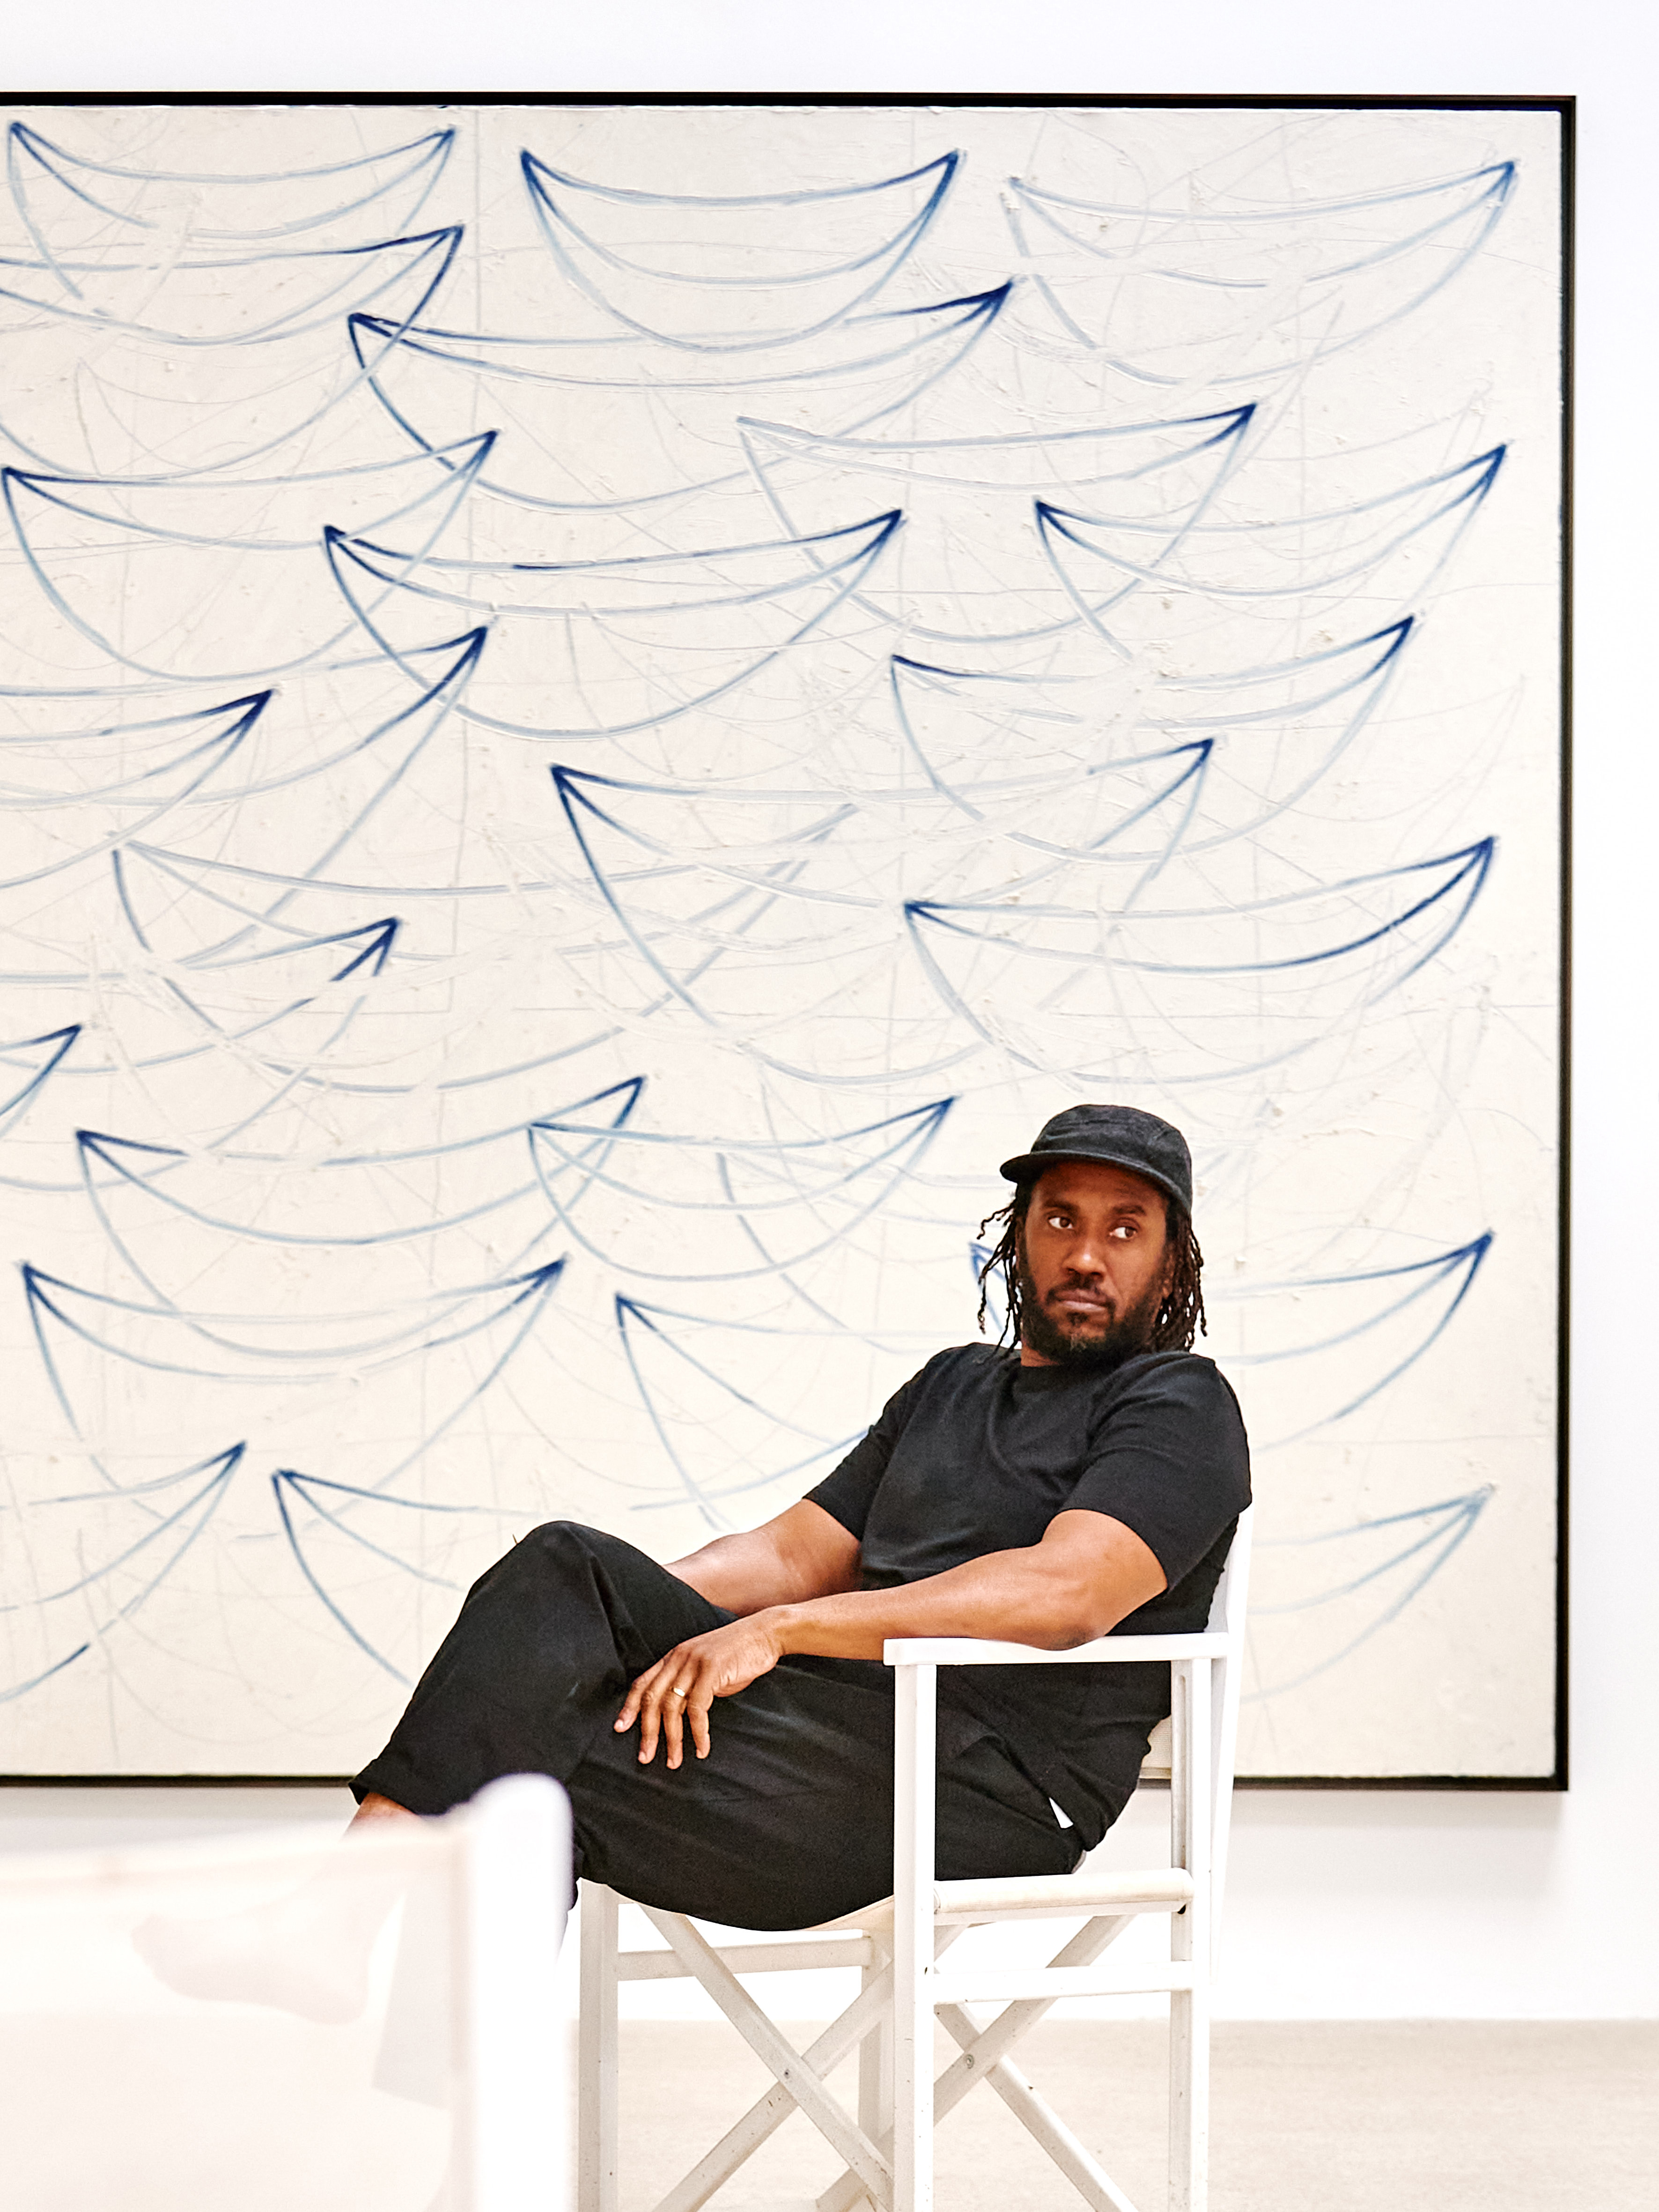 Rashid Johnson photographed by Daniel Schafer courtesy the artist and Hauser